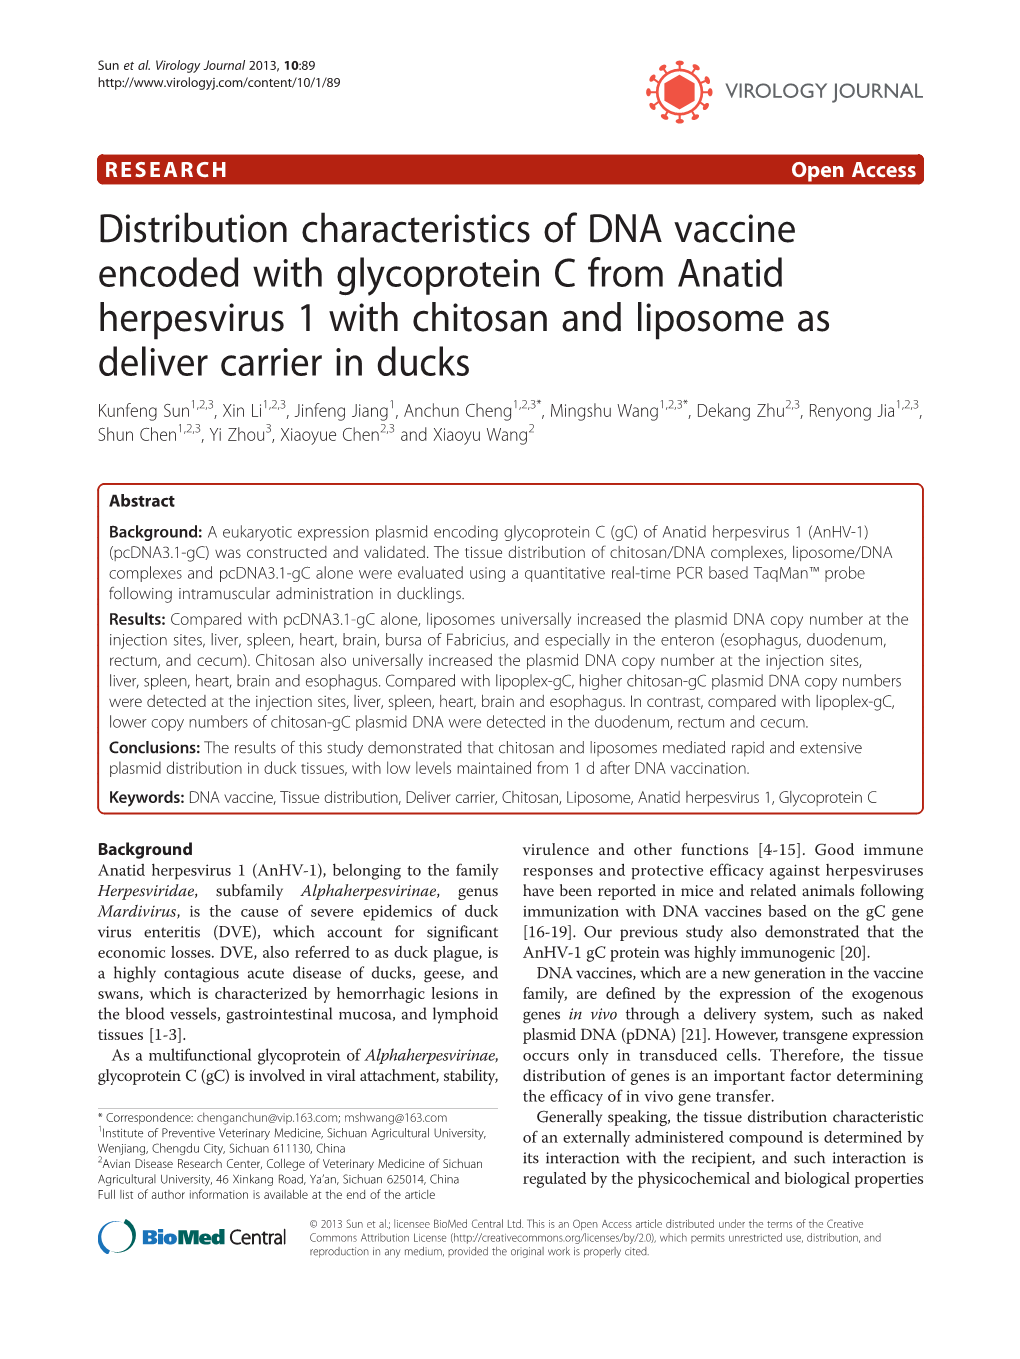 Distribution Characteristics of DNA Vaccine Encoded with Glycoprotein